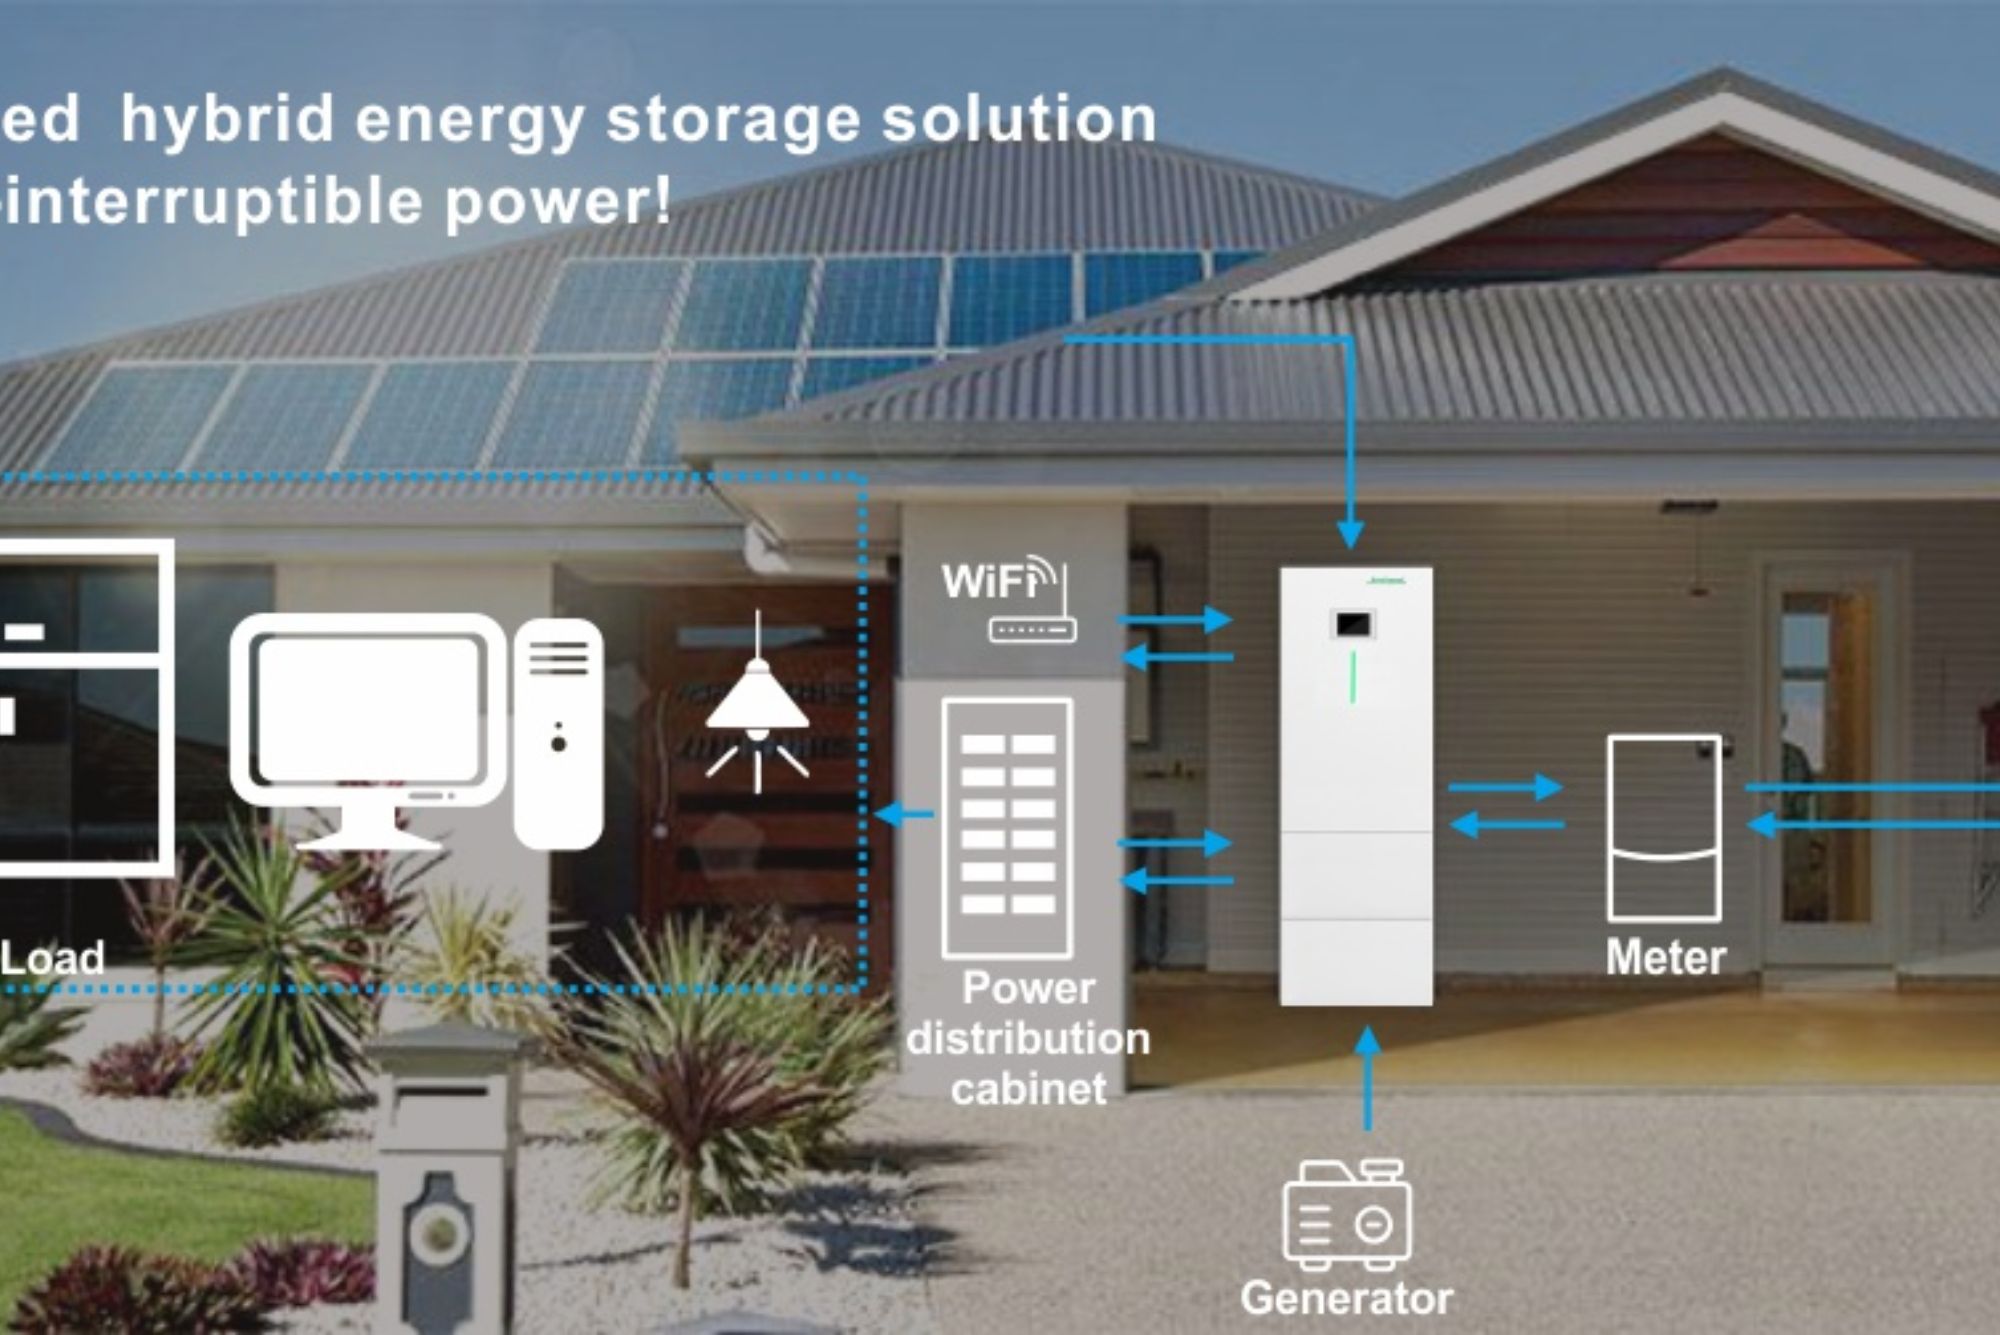 Tecloman's Residential Energy Storage System